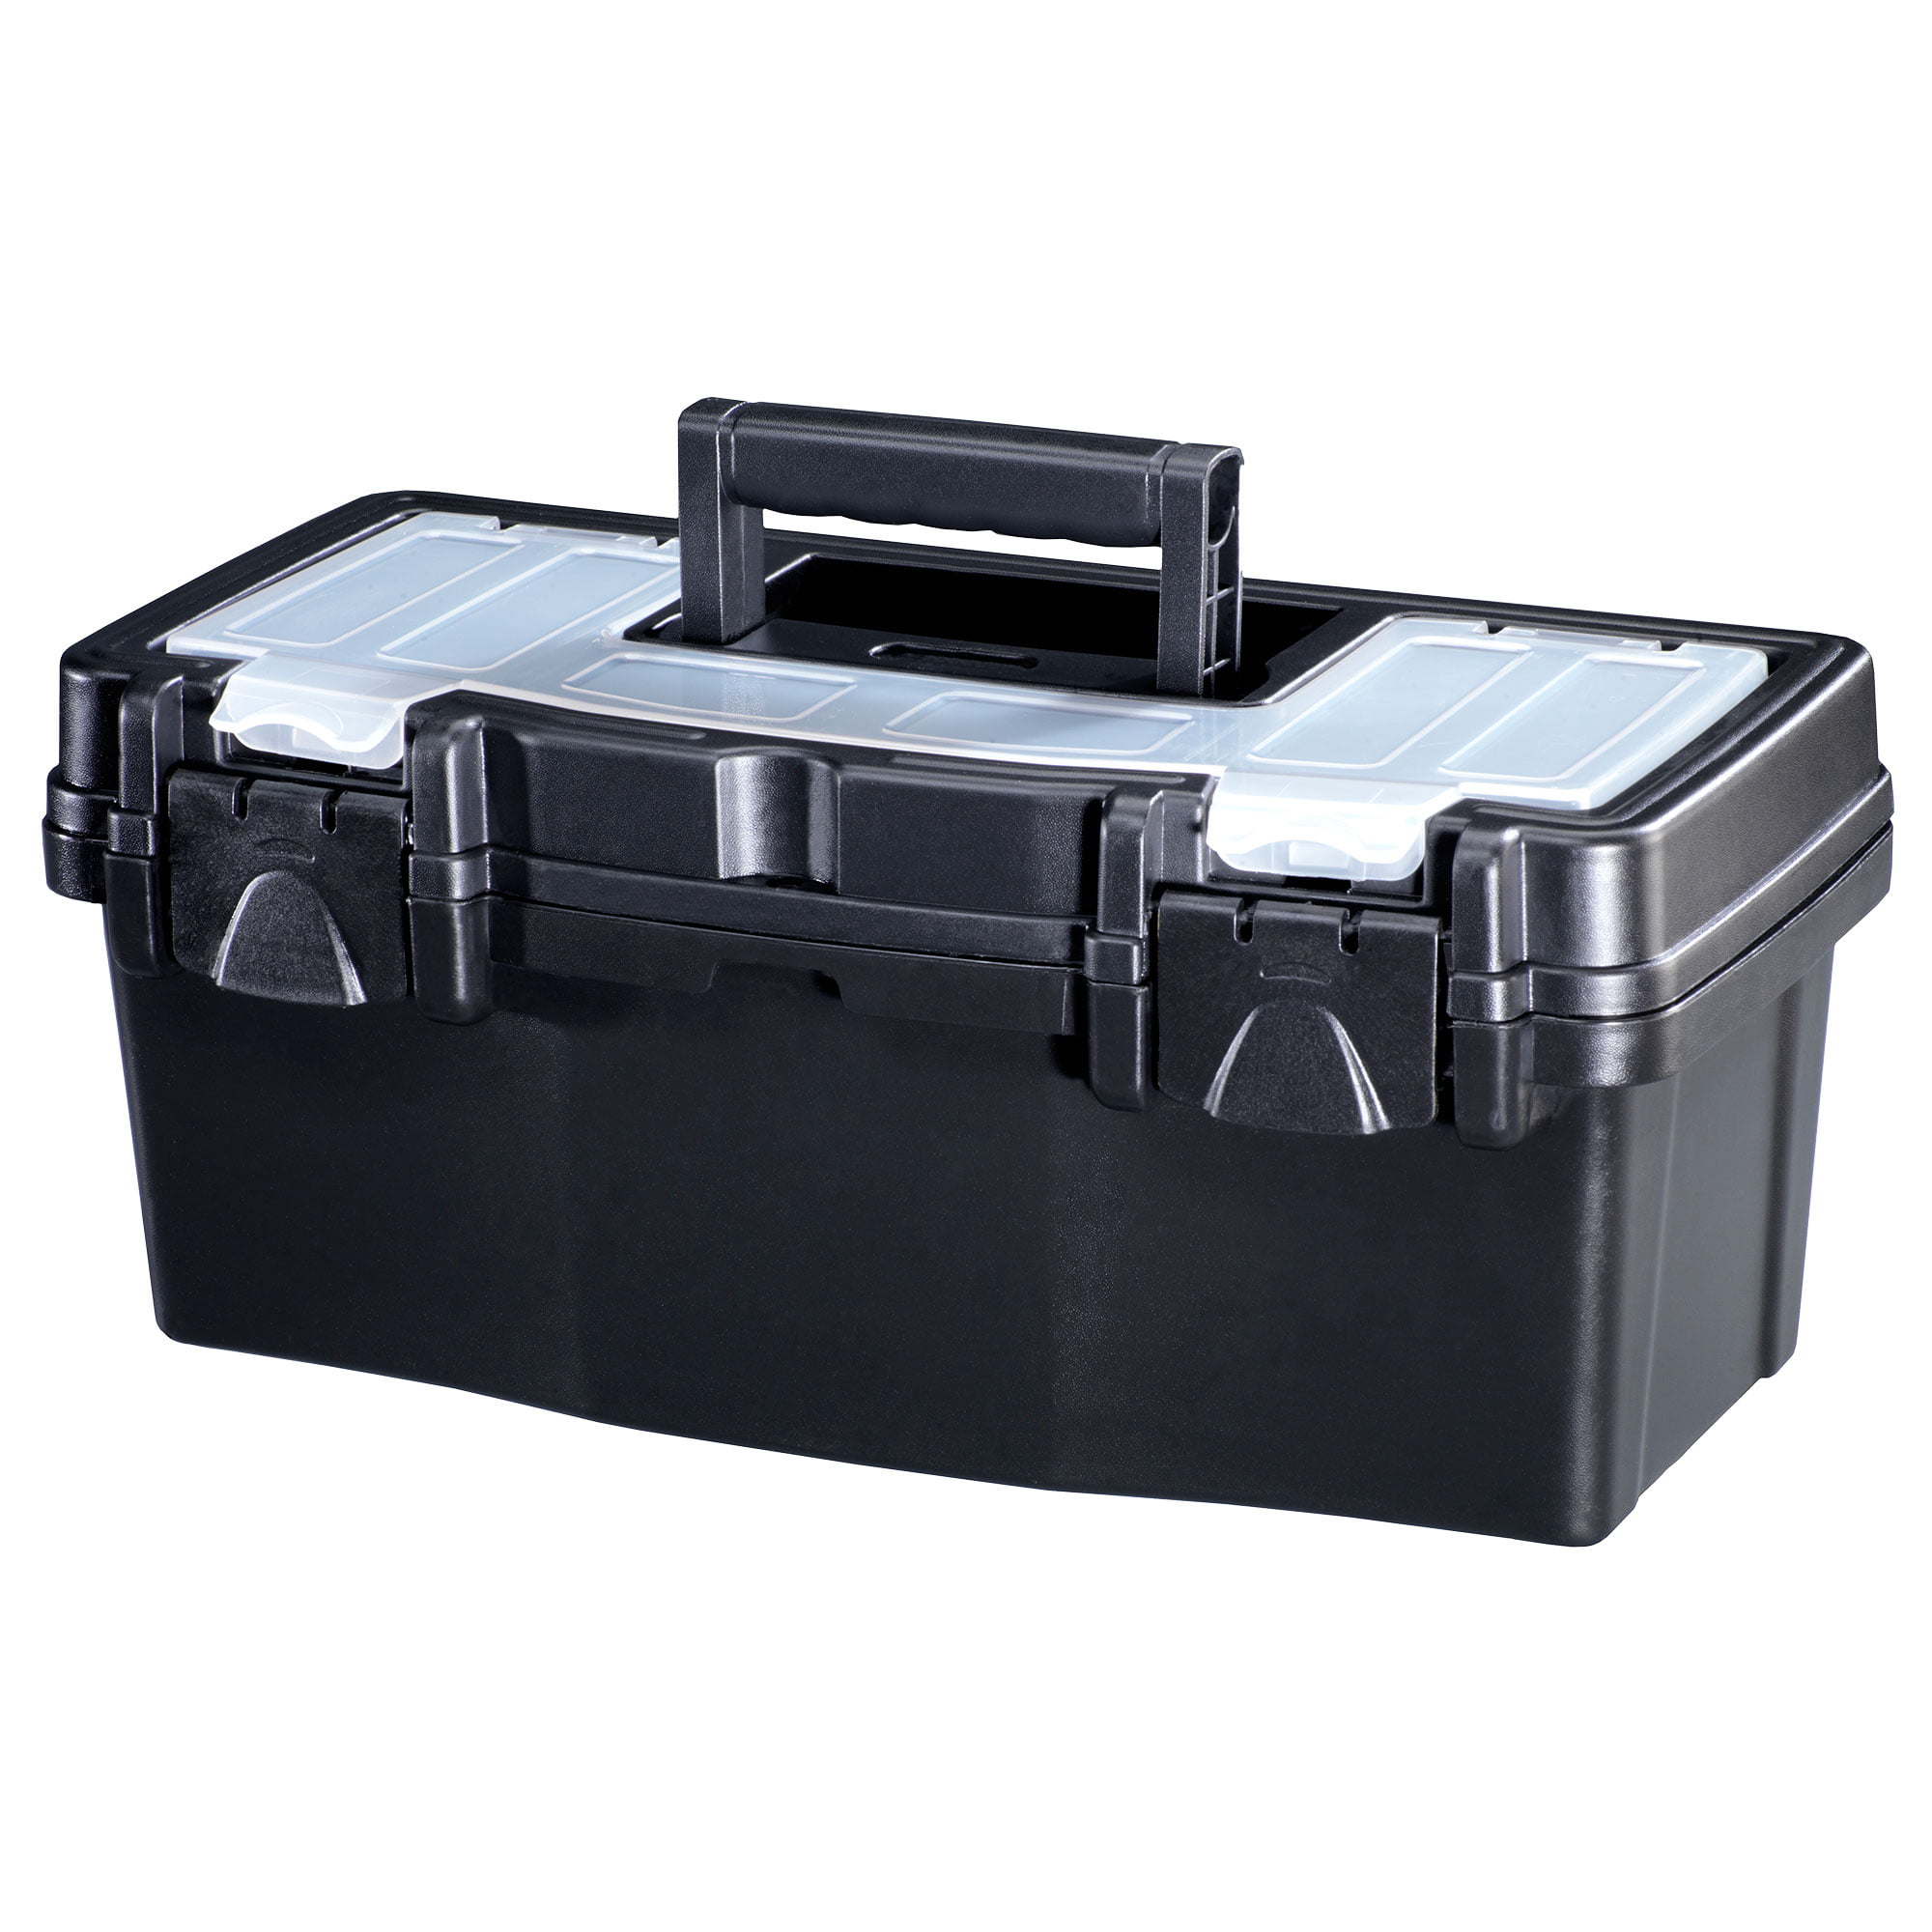 Stack-On 12 Inch Portable Plastic Lockable Tool Box with Lid Organizer  Storage